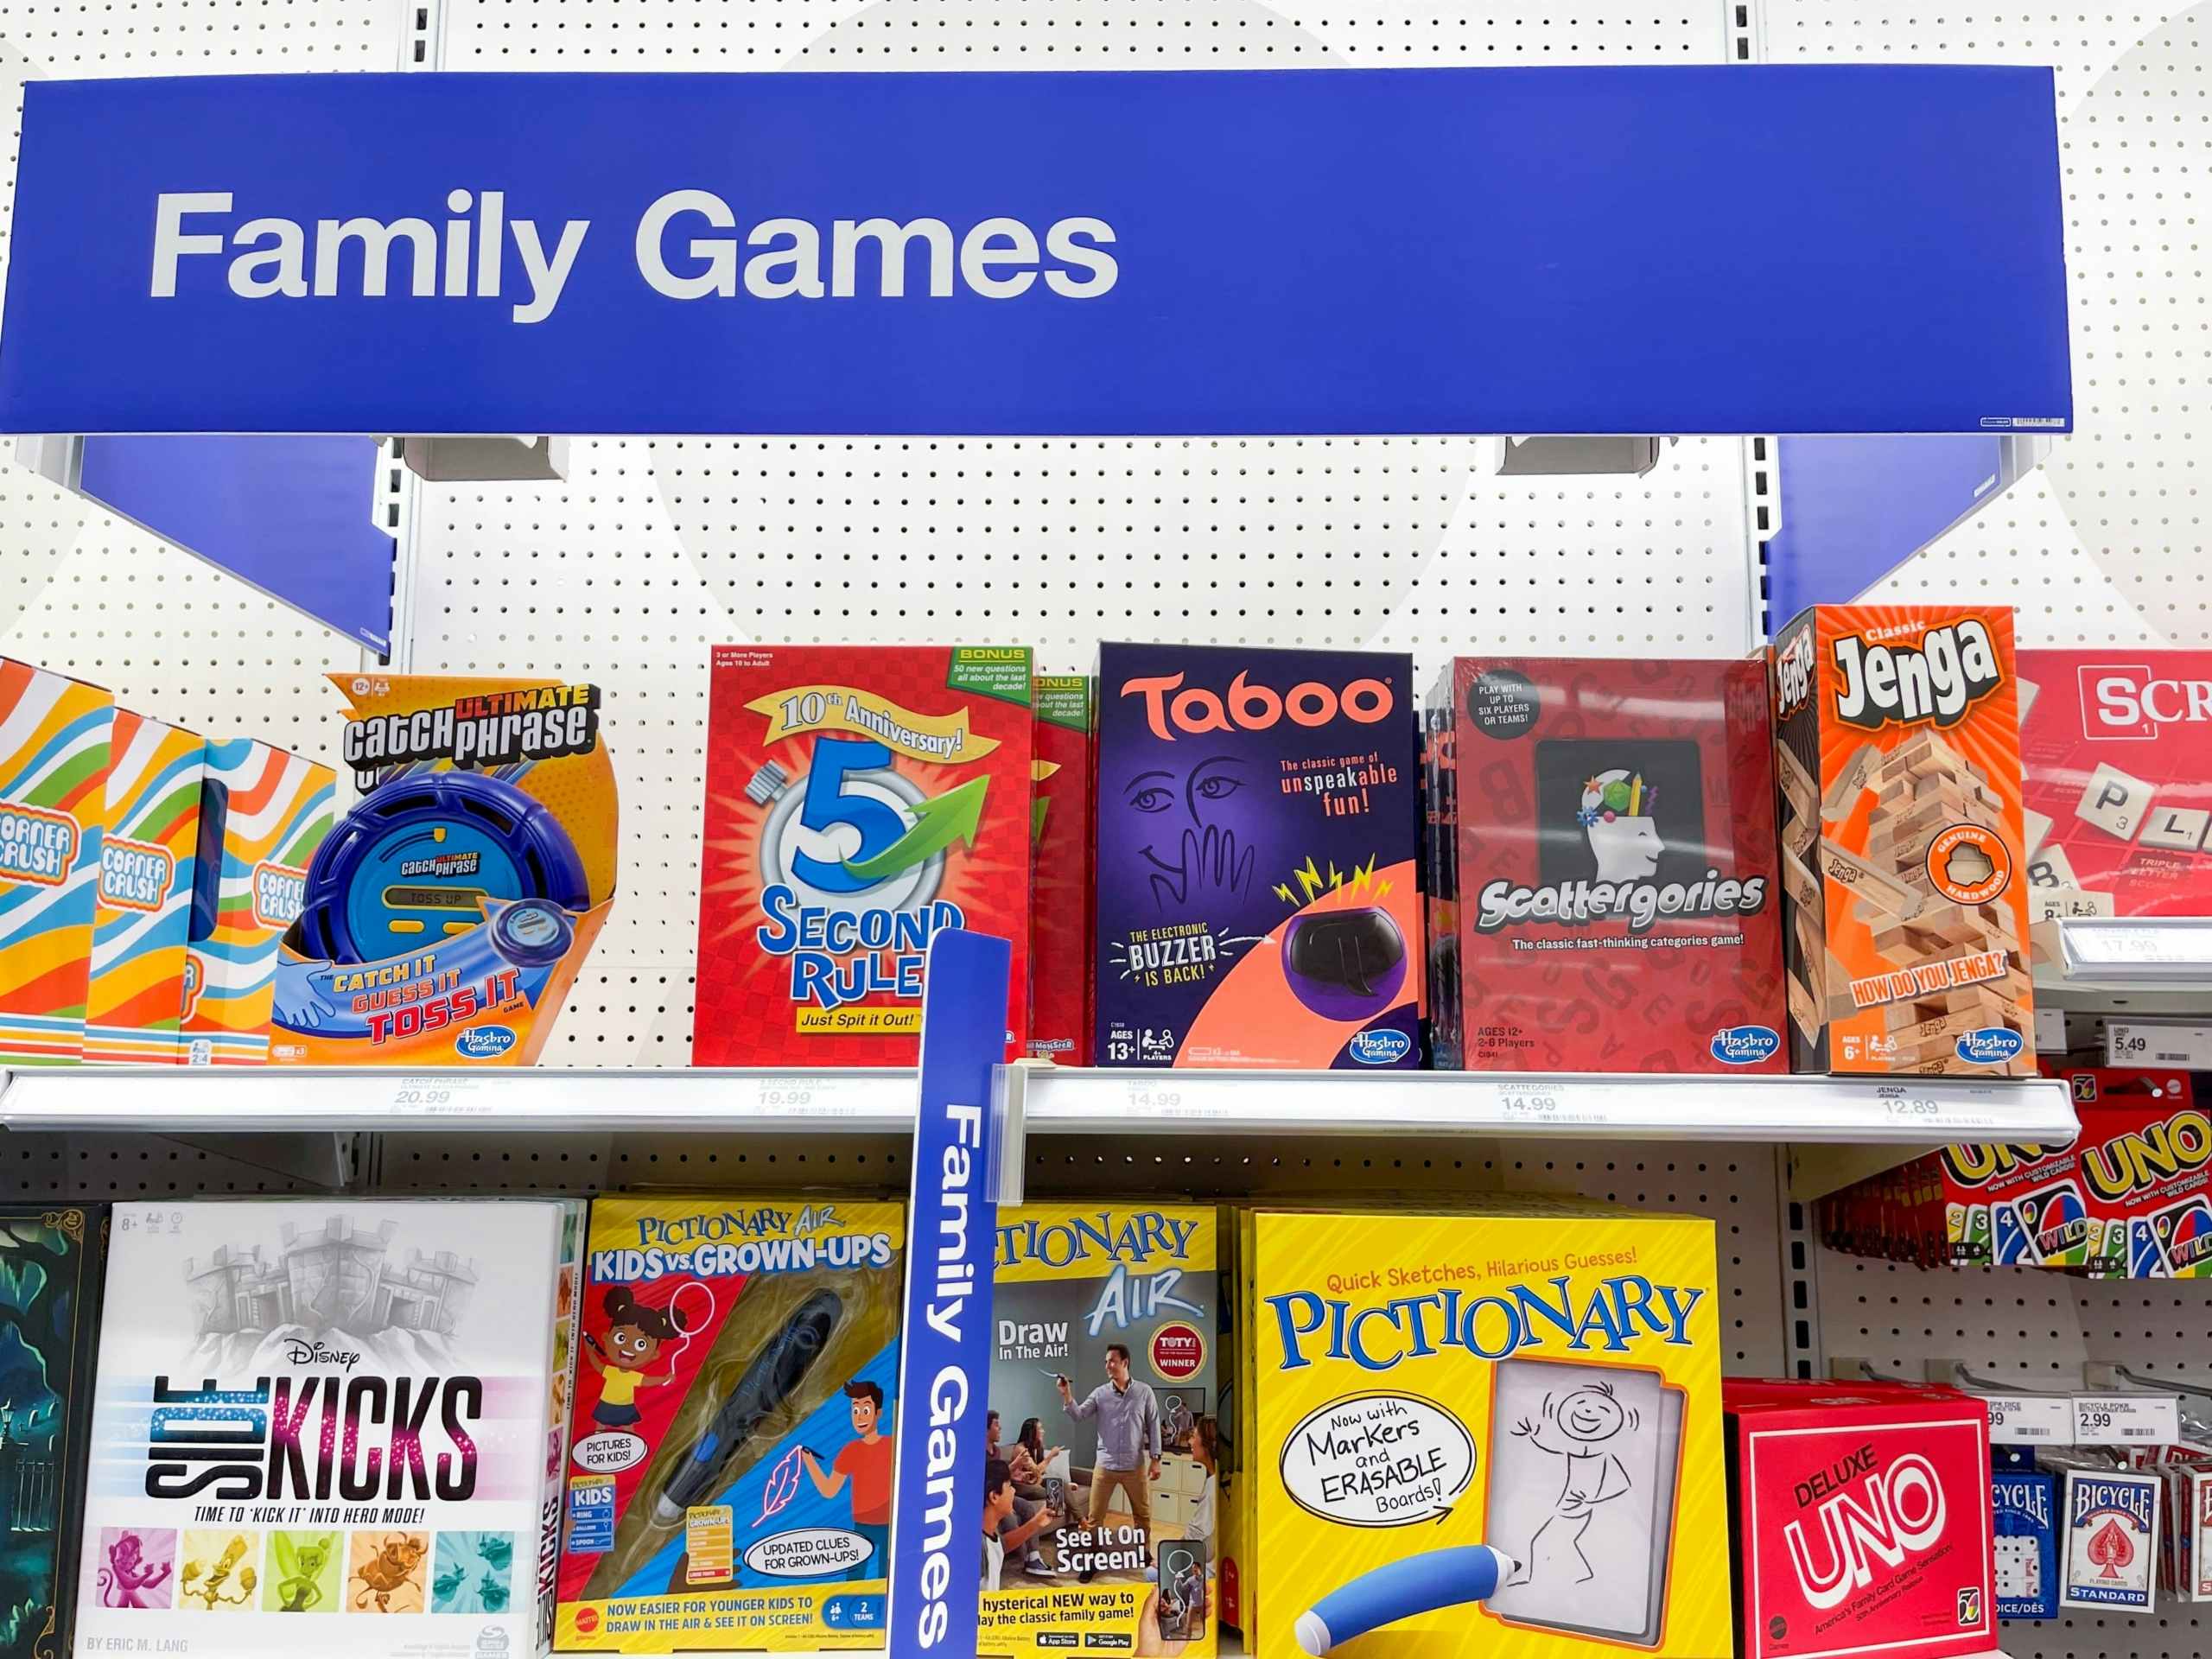 family games sign and area